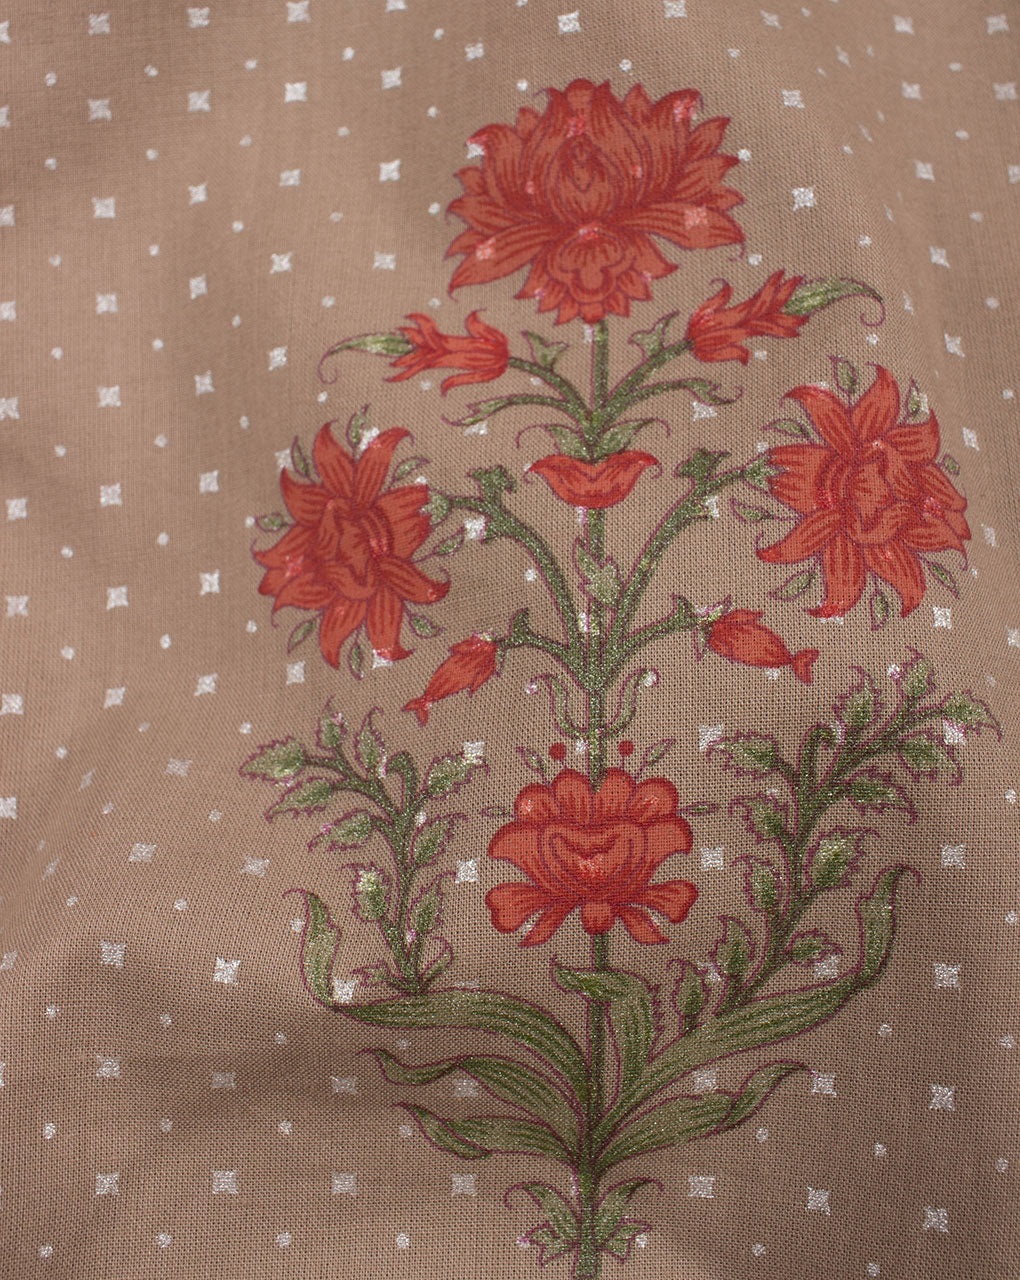 Grey Red Floral Pattern Foil Screen Print Cotton Fabric - Fabriclore.com